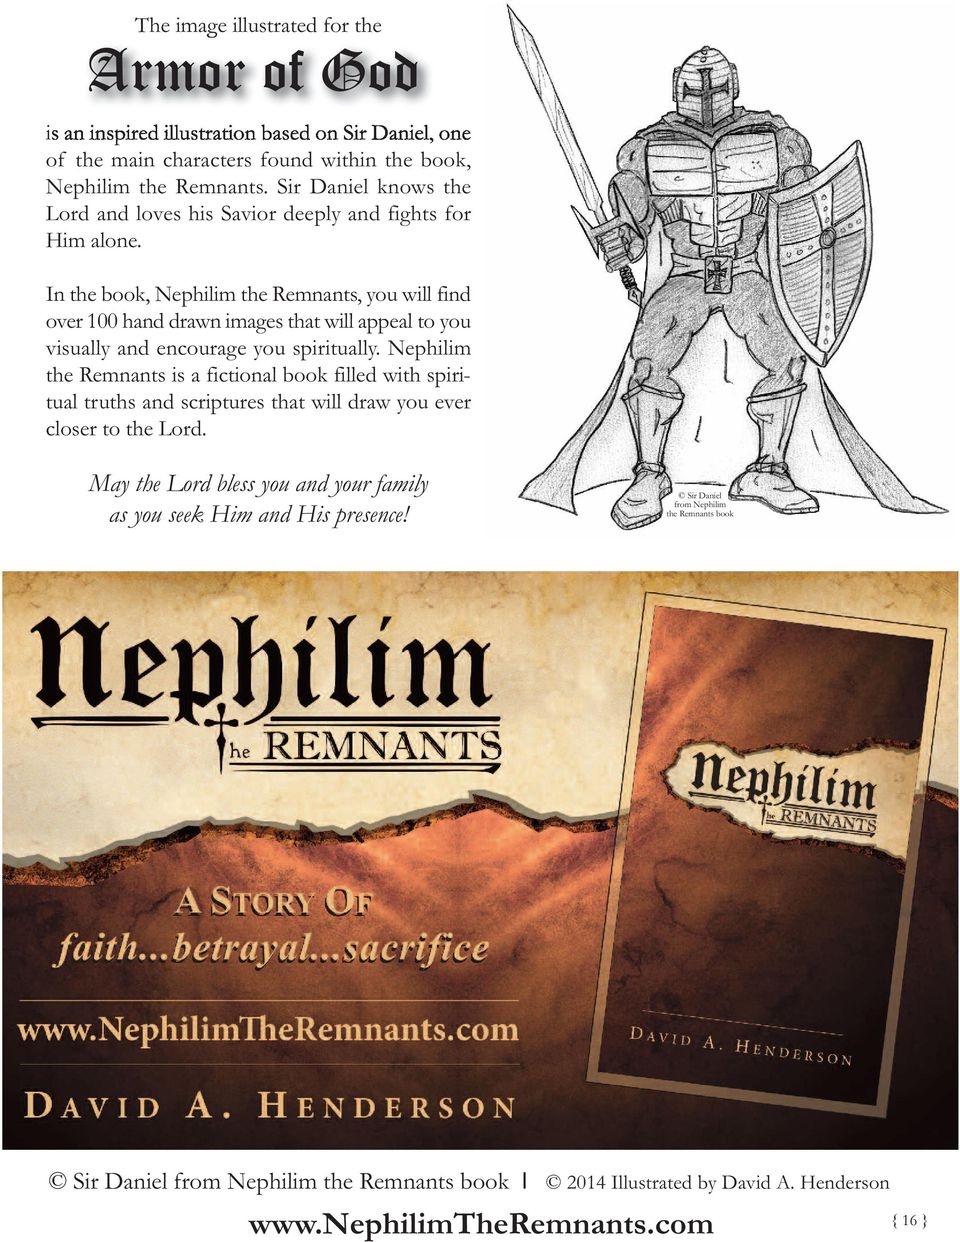 In the book, Nephilim the Remnants, you will find over 100 hand drawn images that will appeal to you visually and encourage you spiritually.